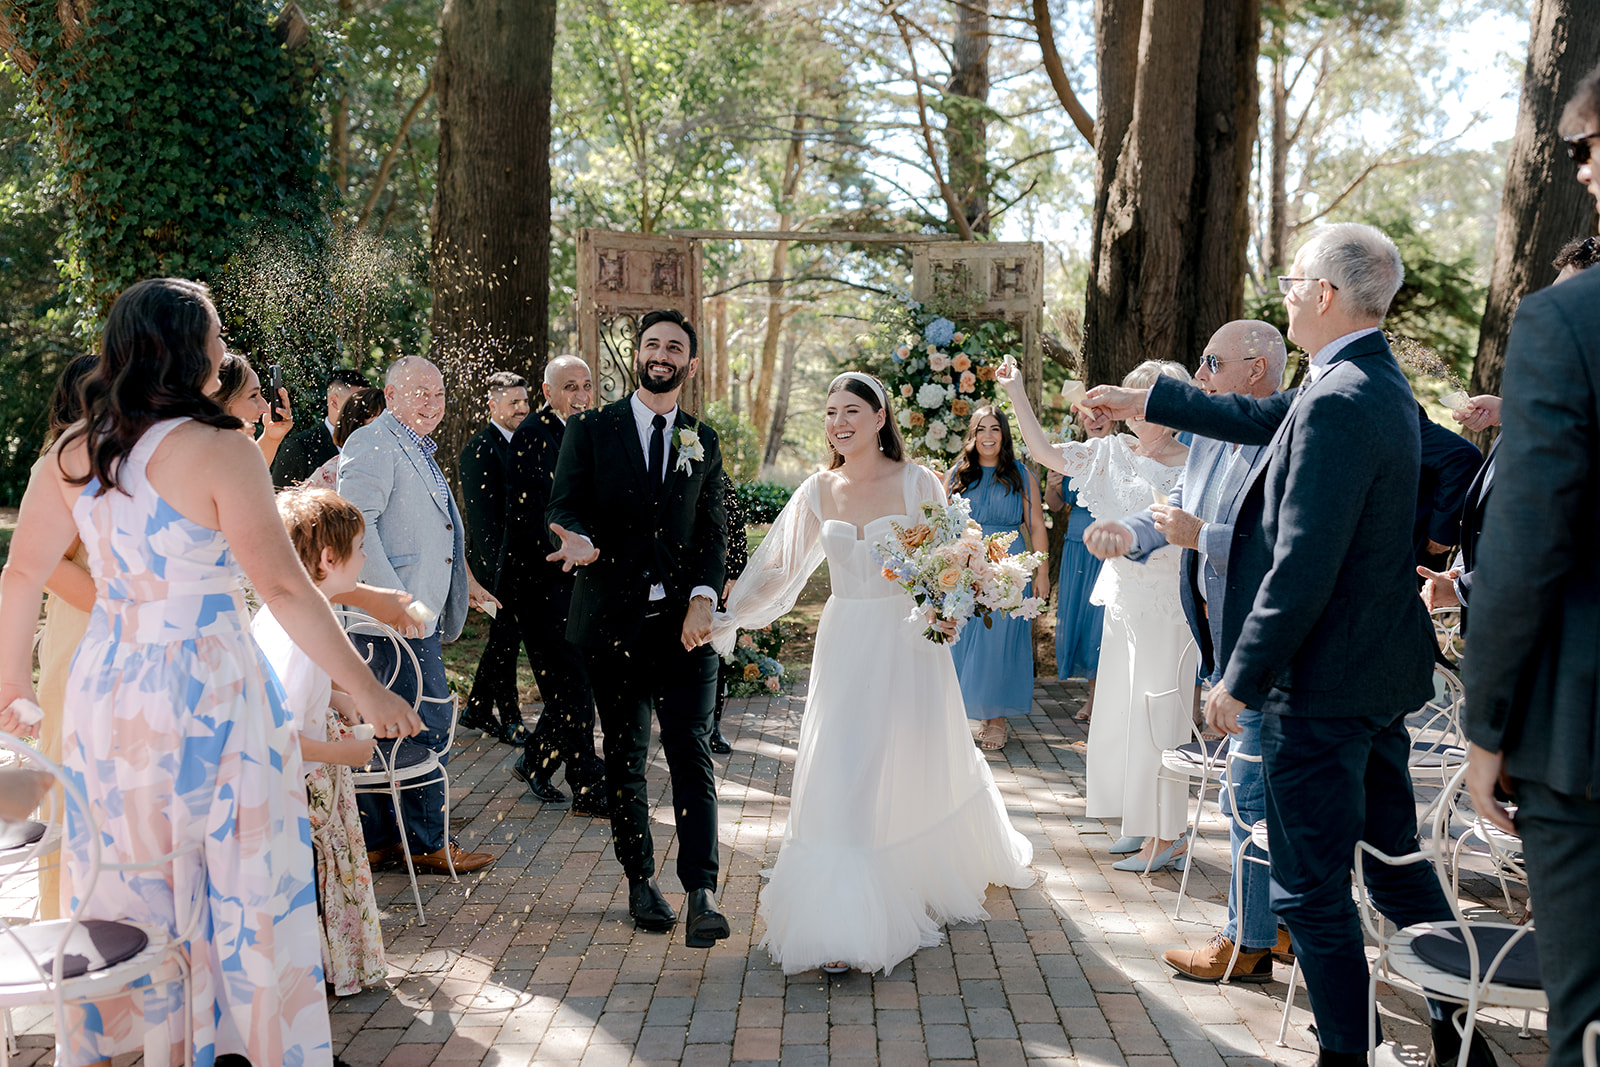 Bride & groom walking up the aisle under a sea of confetti after their elegant country wedding ceremony.